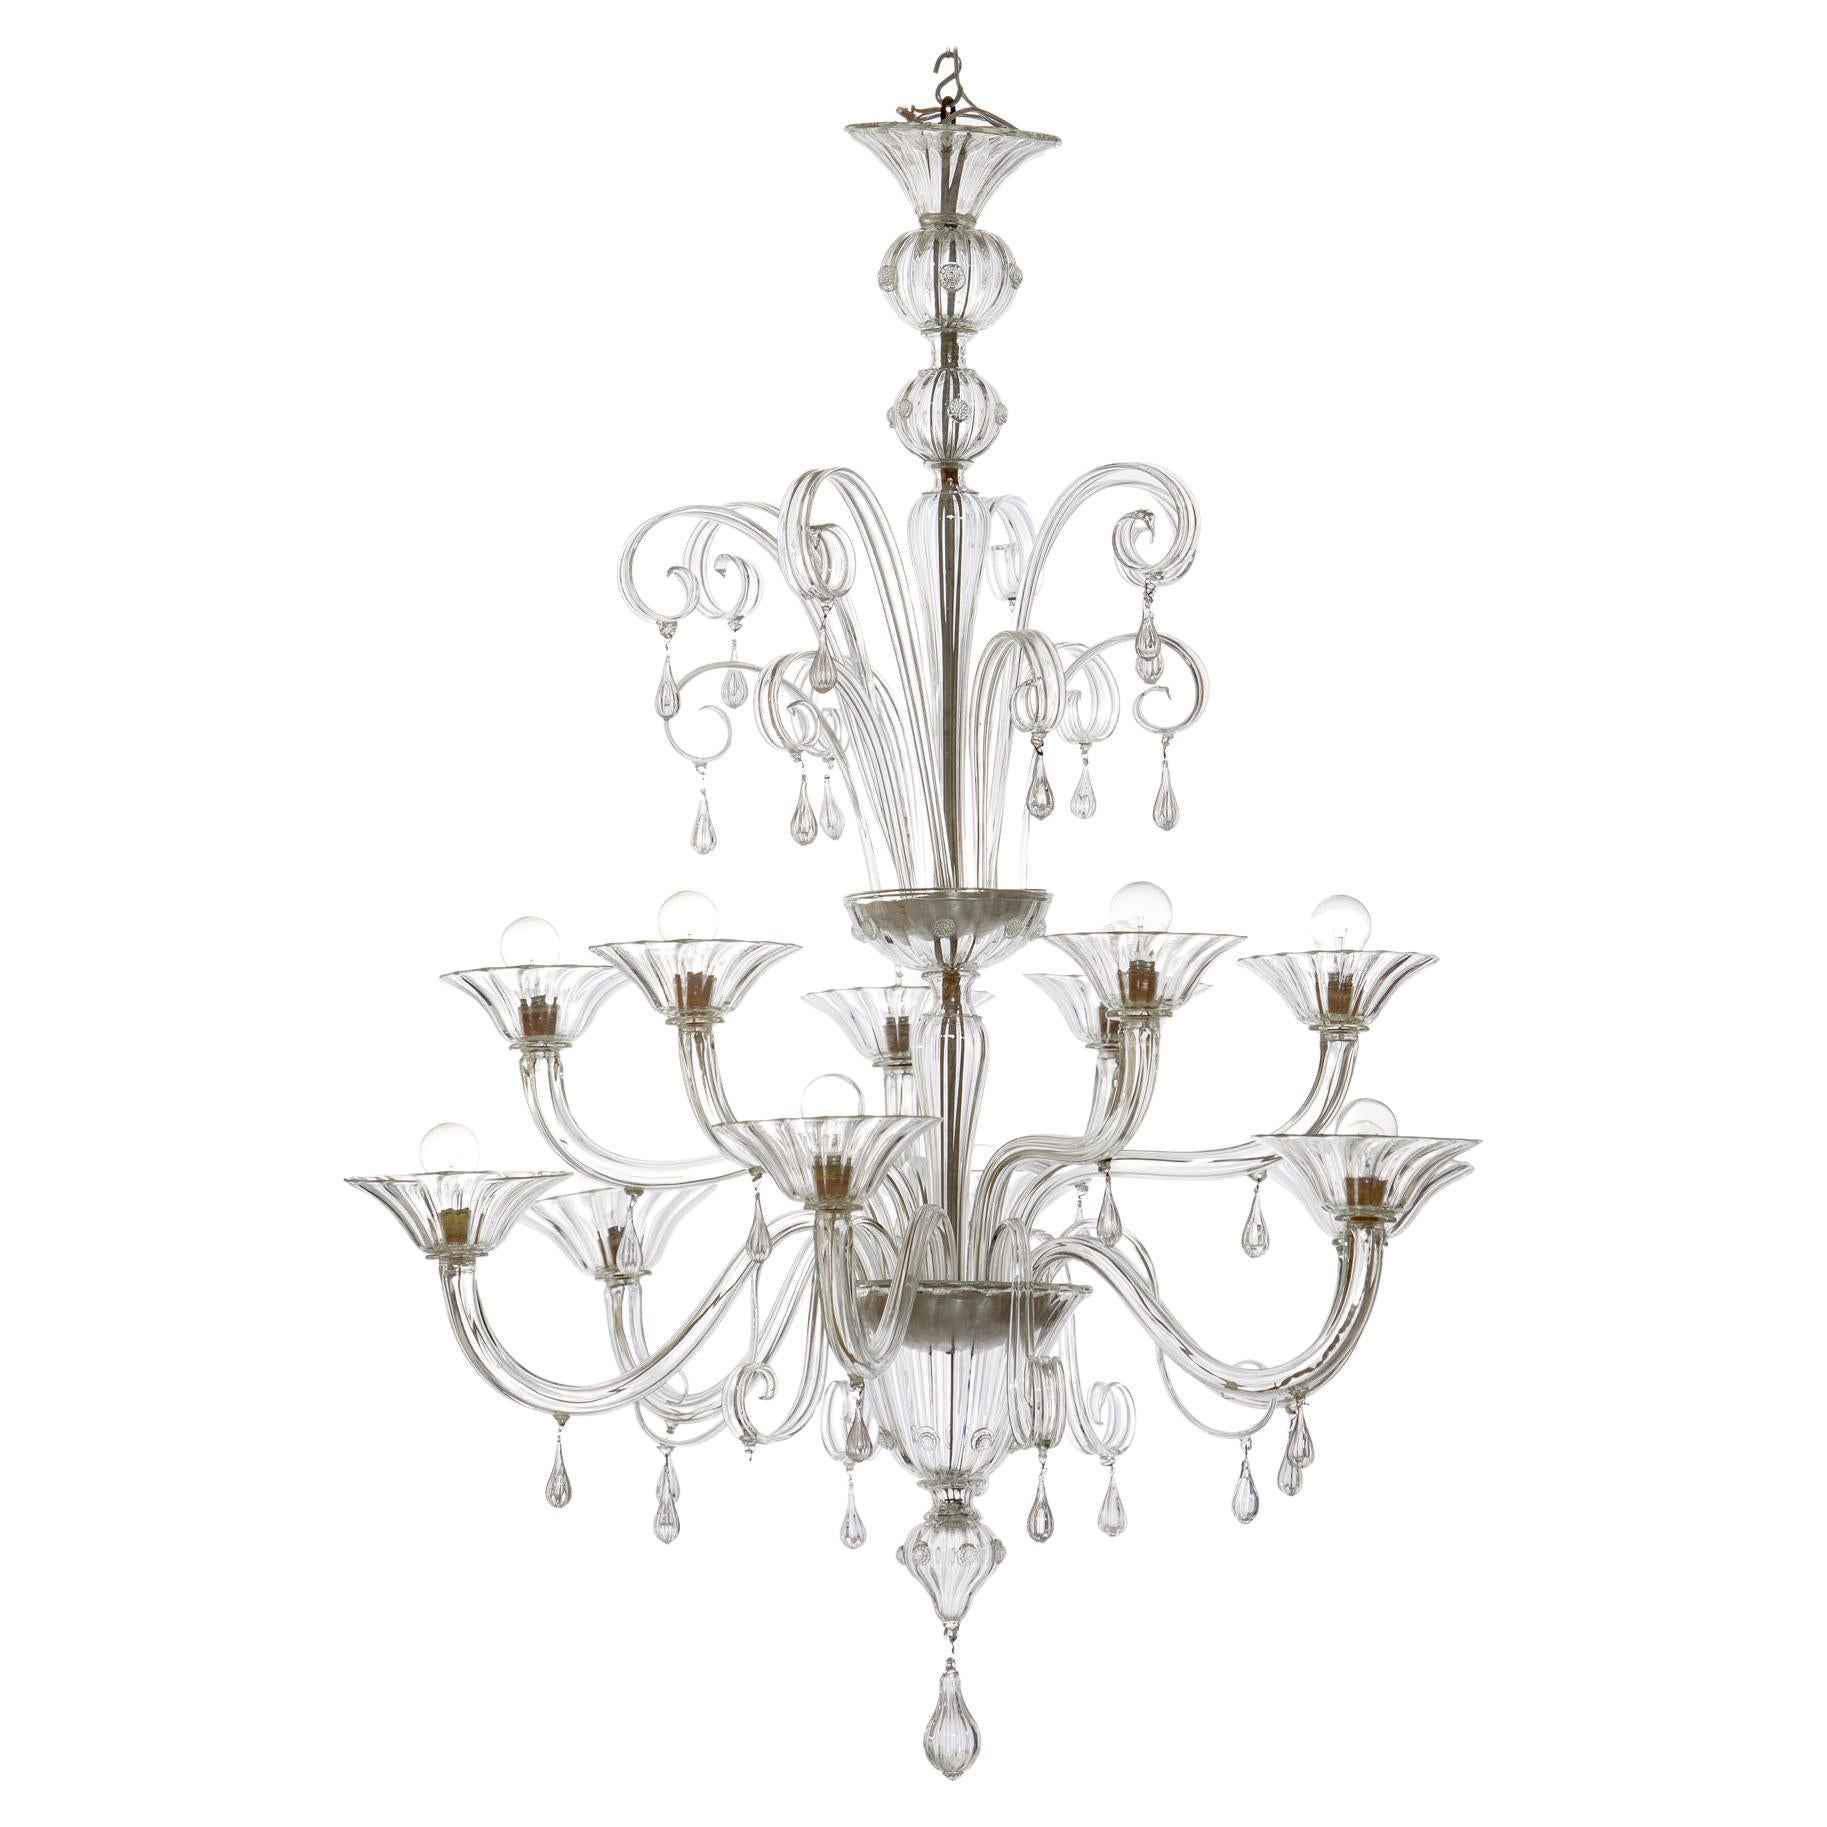 Large Murano glass chandelier, Italy 1940.
Beautiful chandelier with 12 lights six arms in the bottom part and six in the upper part, the structure entirely made of hand-blown glass has elegant details and finishes, like the drops and the light